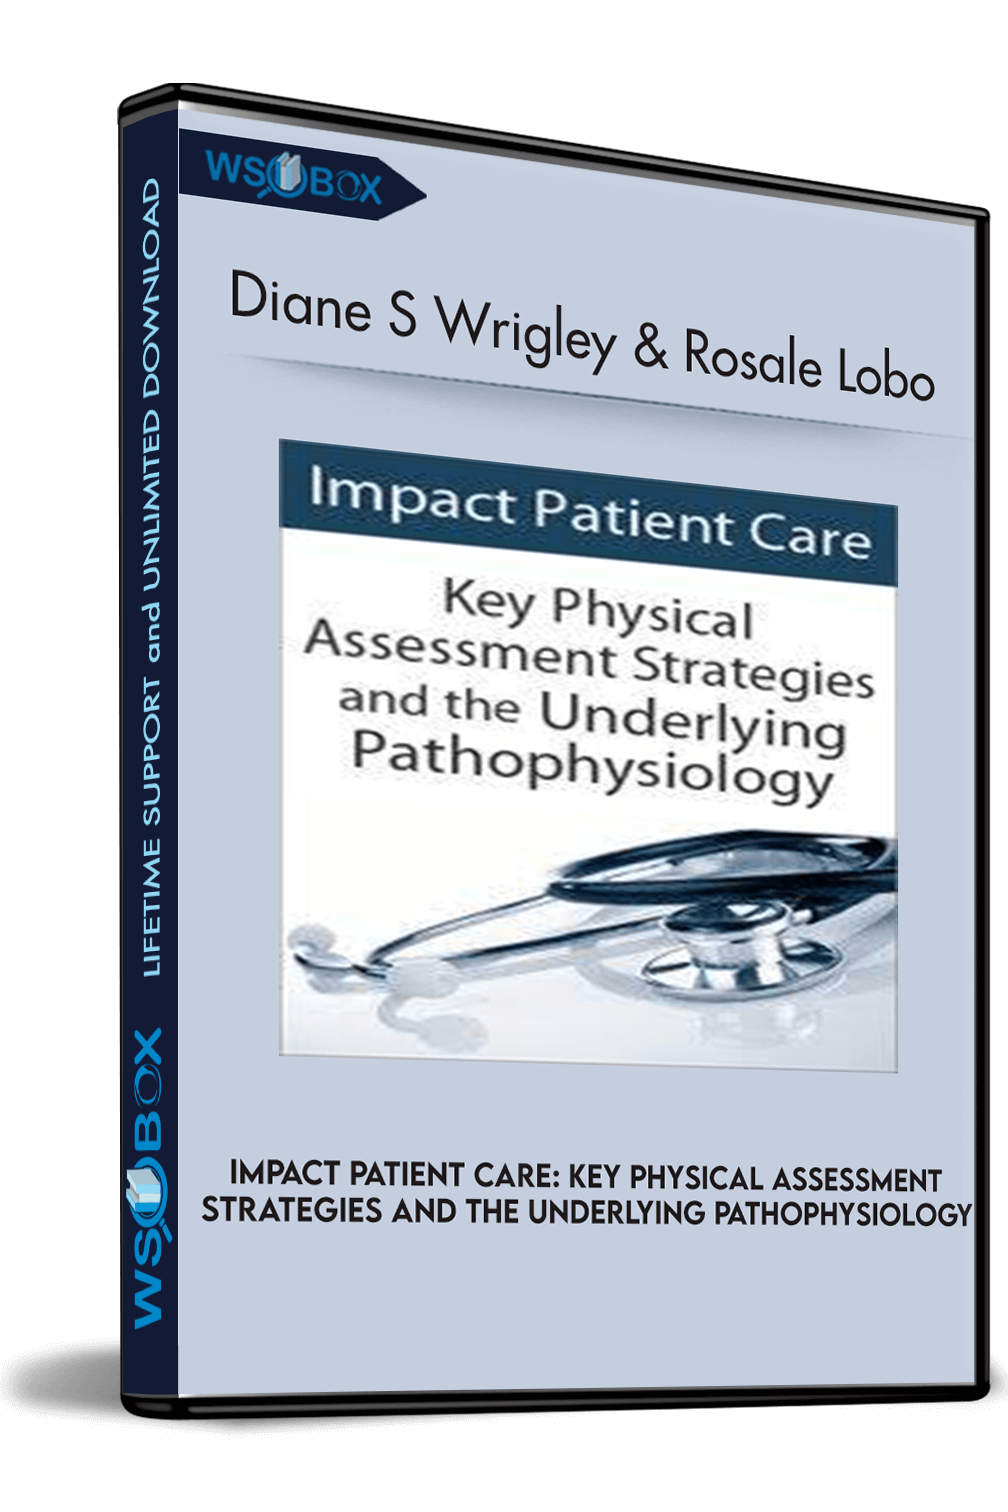 impact-patient-care-key-physical-assessment-strategies-and-the-underlying-pathophysiology-diane-s-wrigley-rosale-lobo